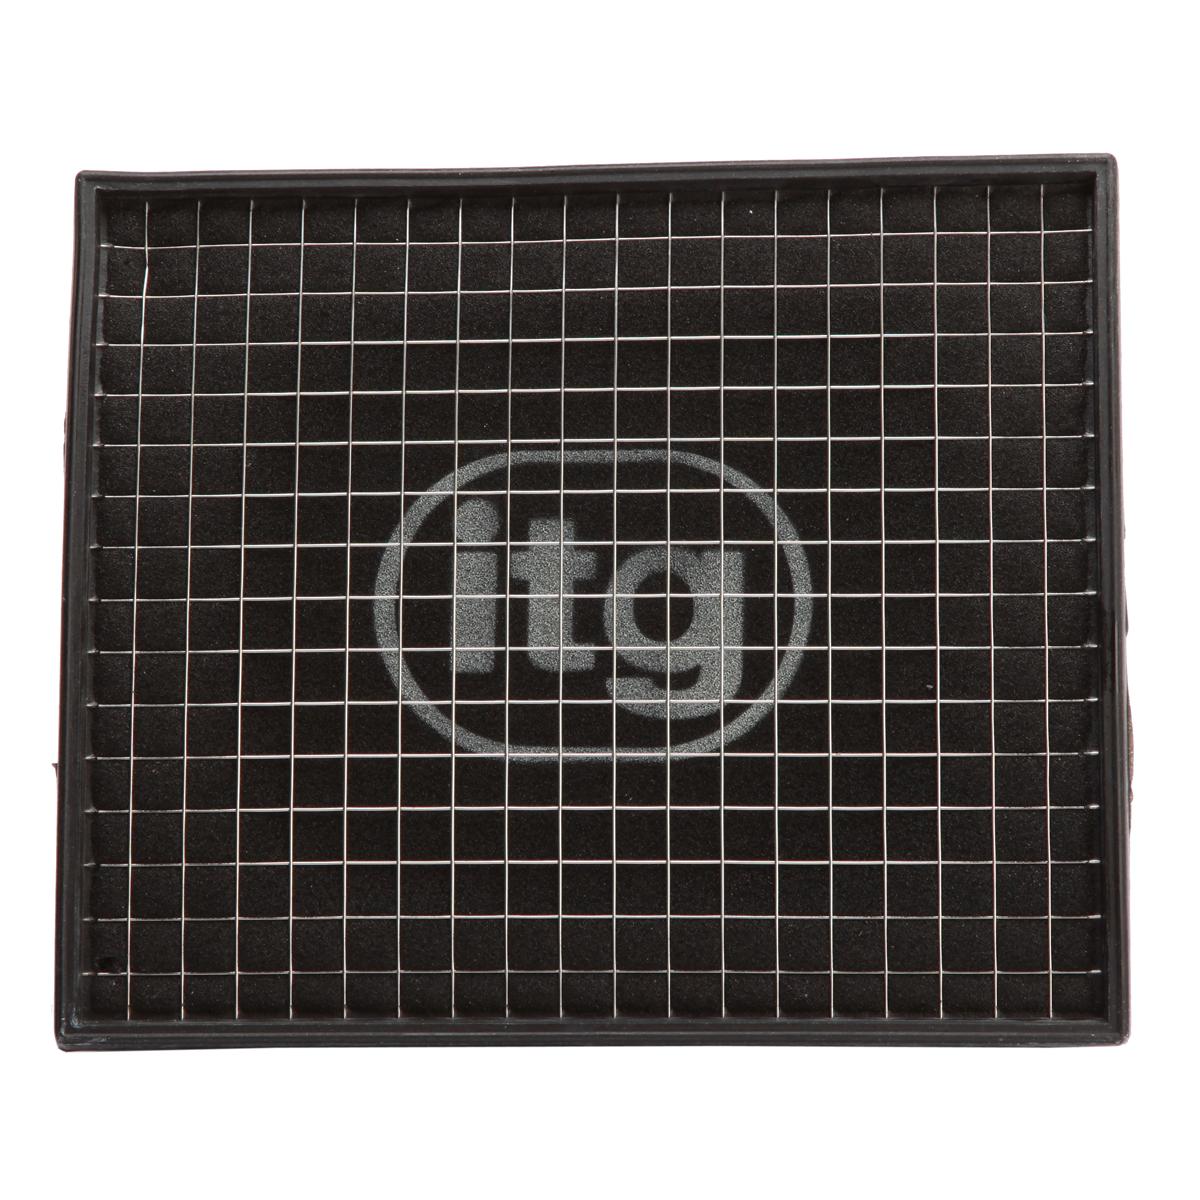 ITG Air Filter For VW Golf Mk III  All Models Incl GTI  VR6 Etc